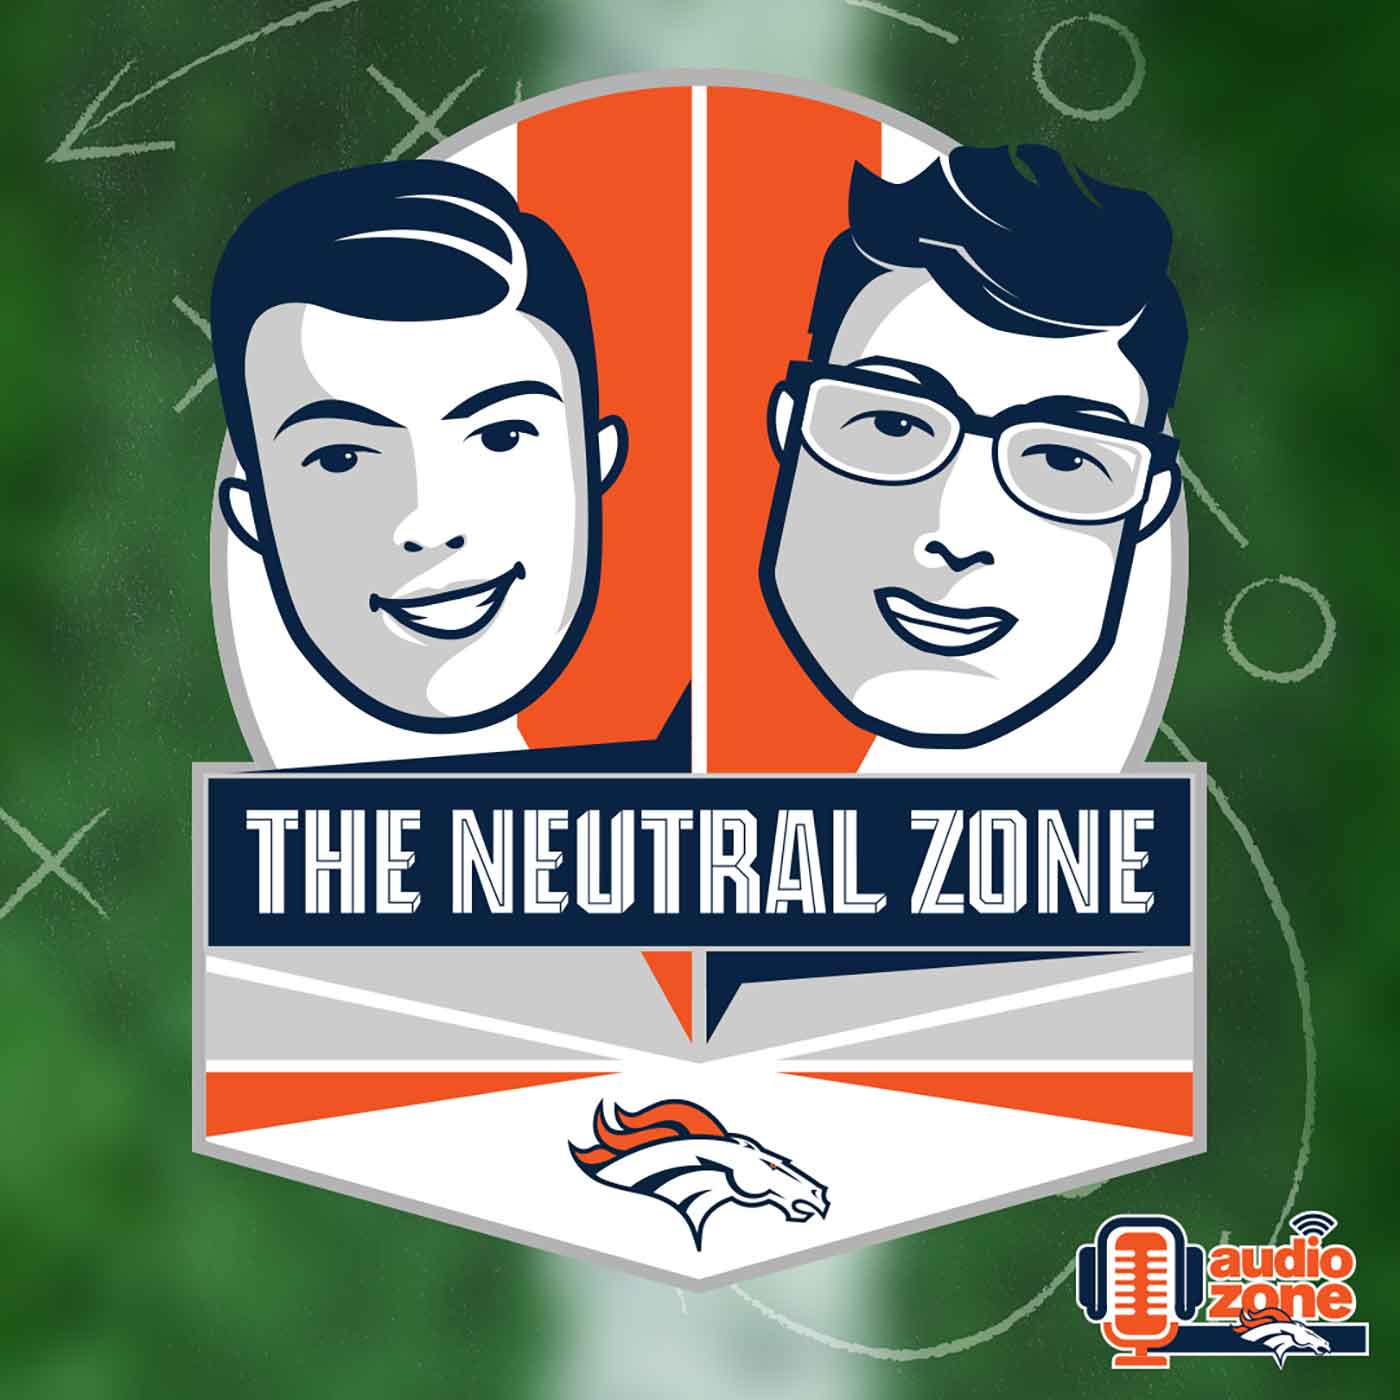 The Neutral Zone: How a Week 1 win could build the Broncos' confidence